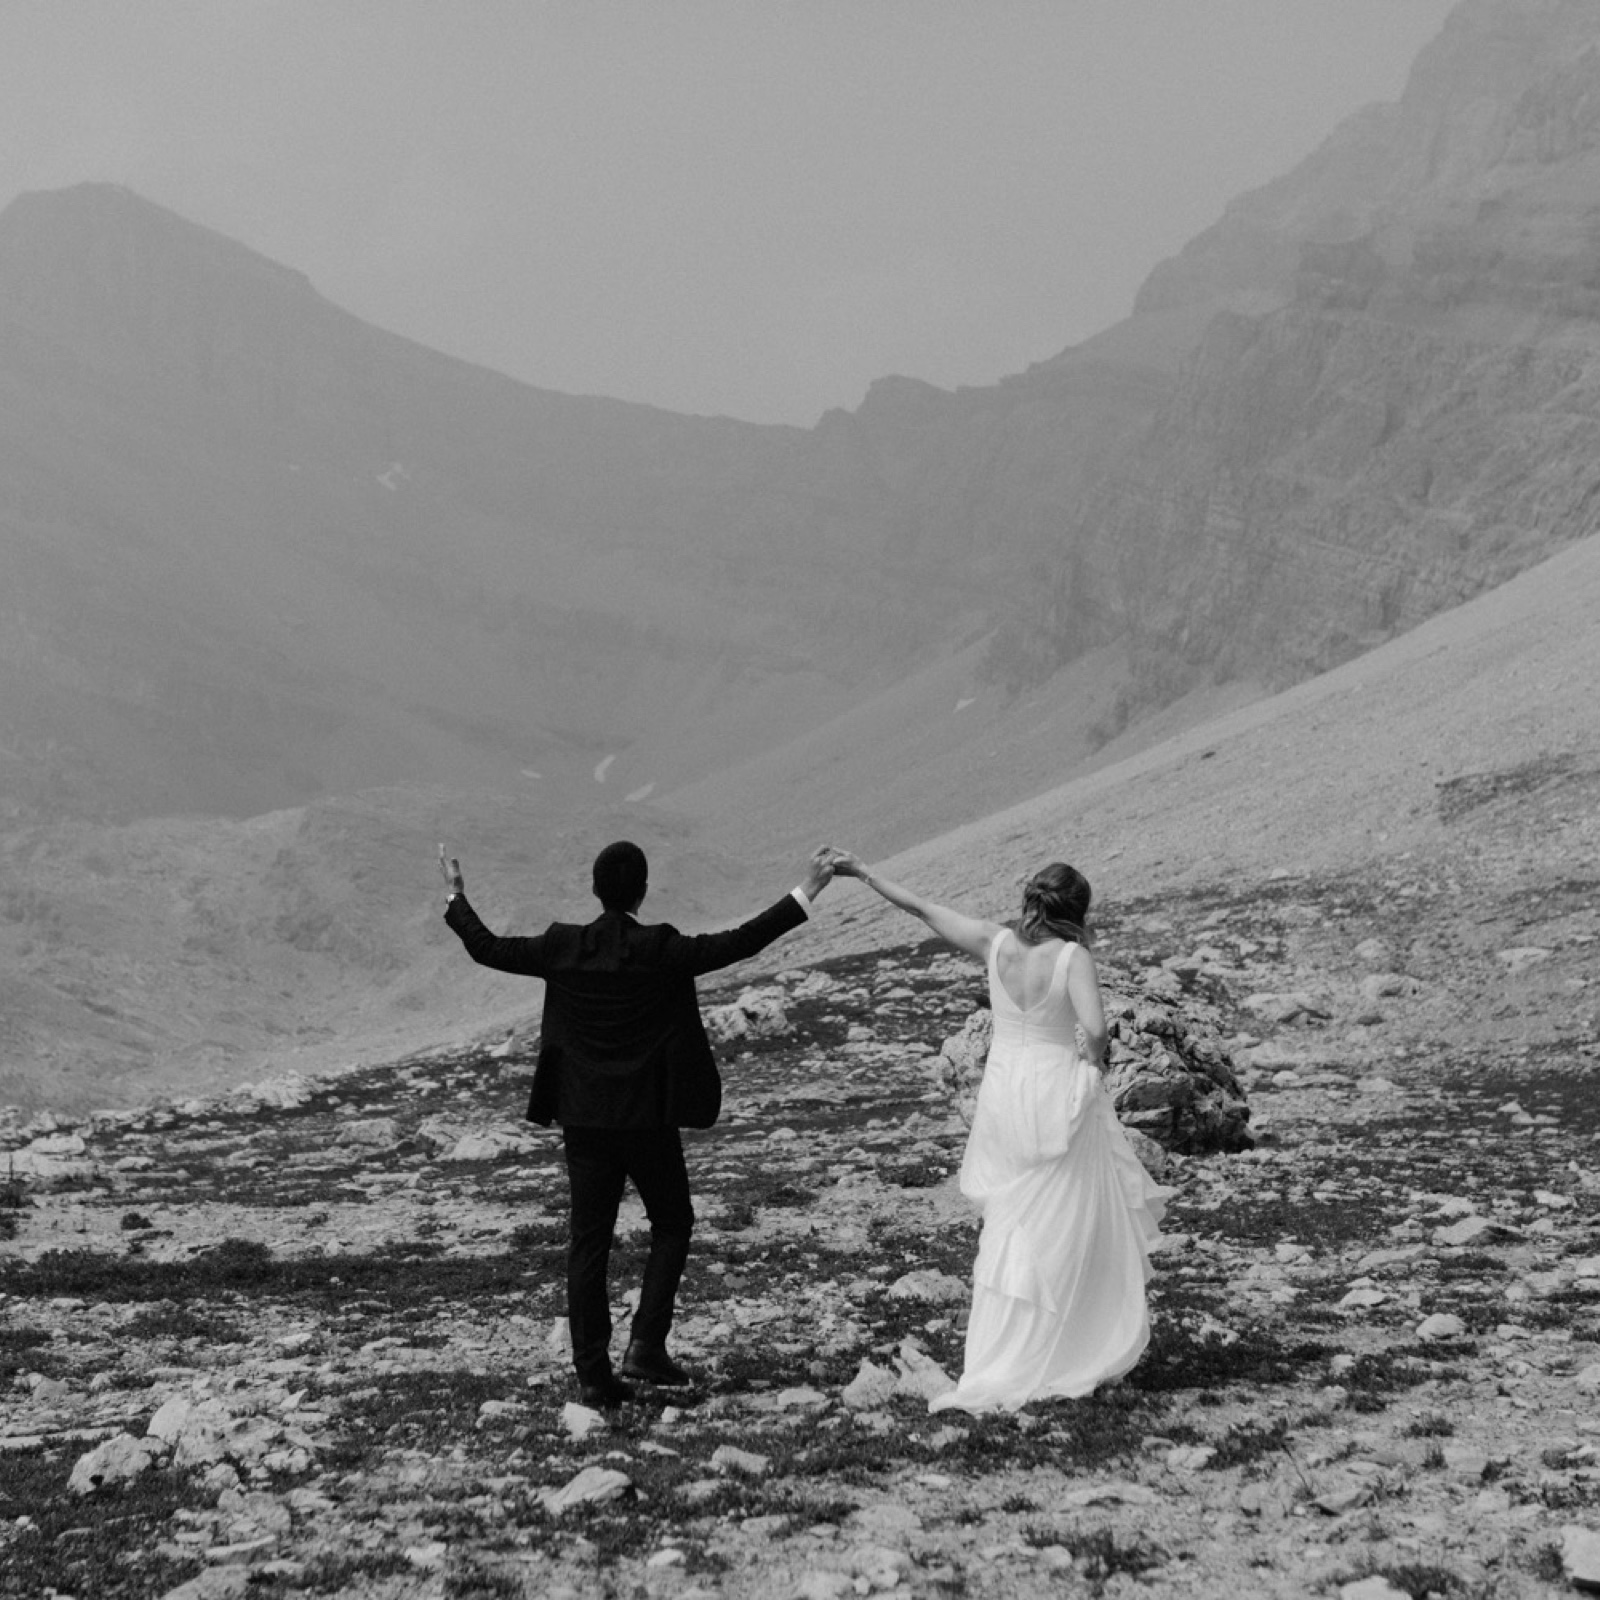 Hiking wedding photography in glacial moraine by Skoki Lodge in the Banff backcountry